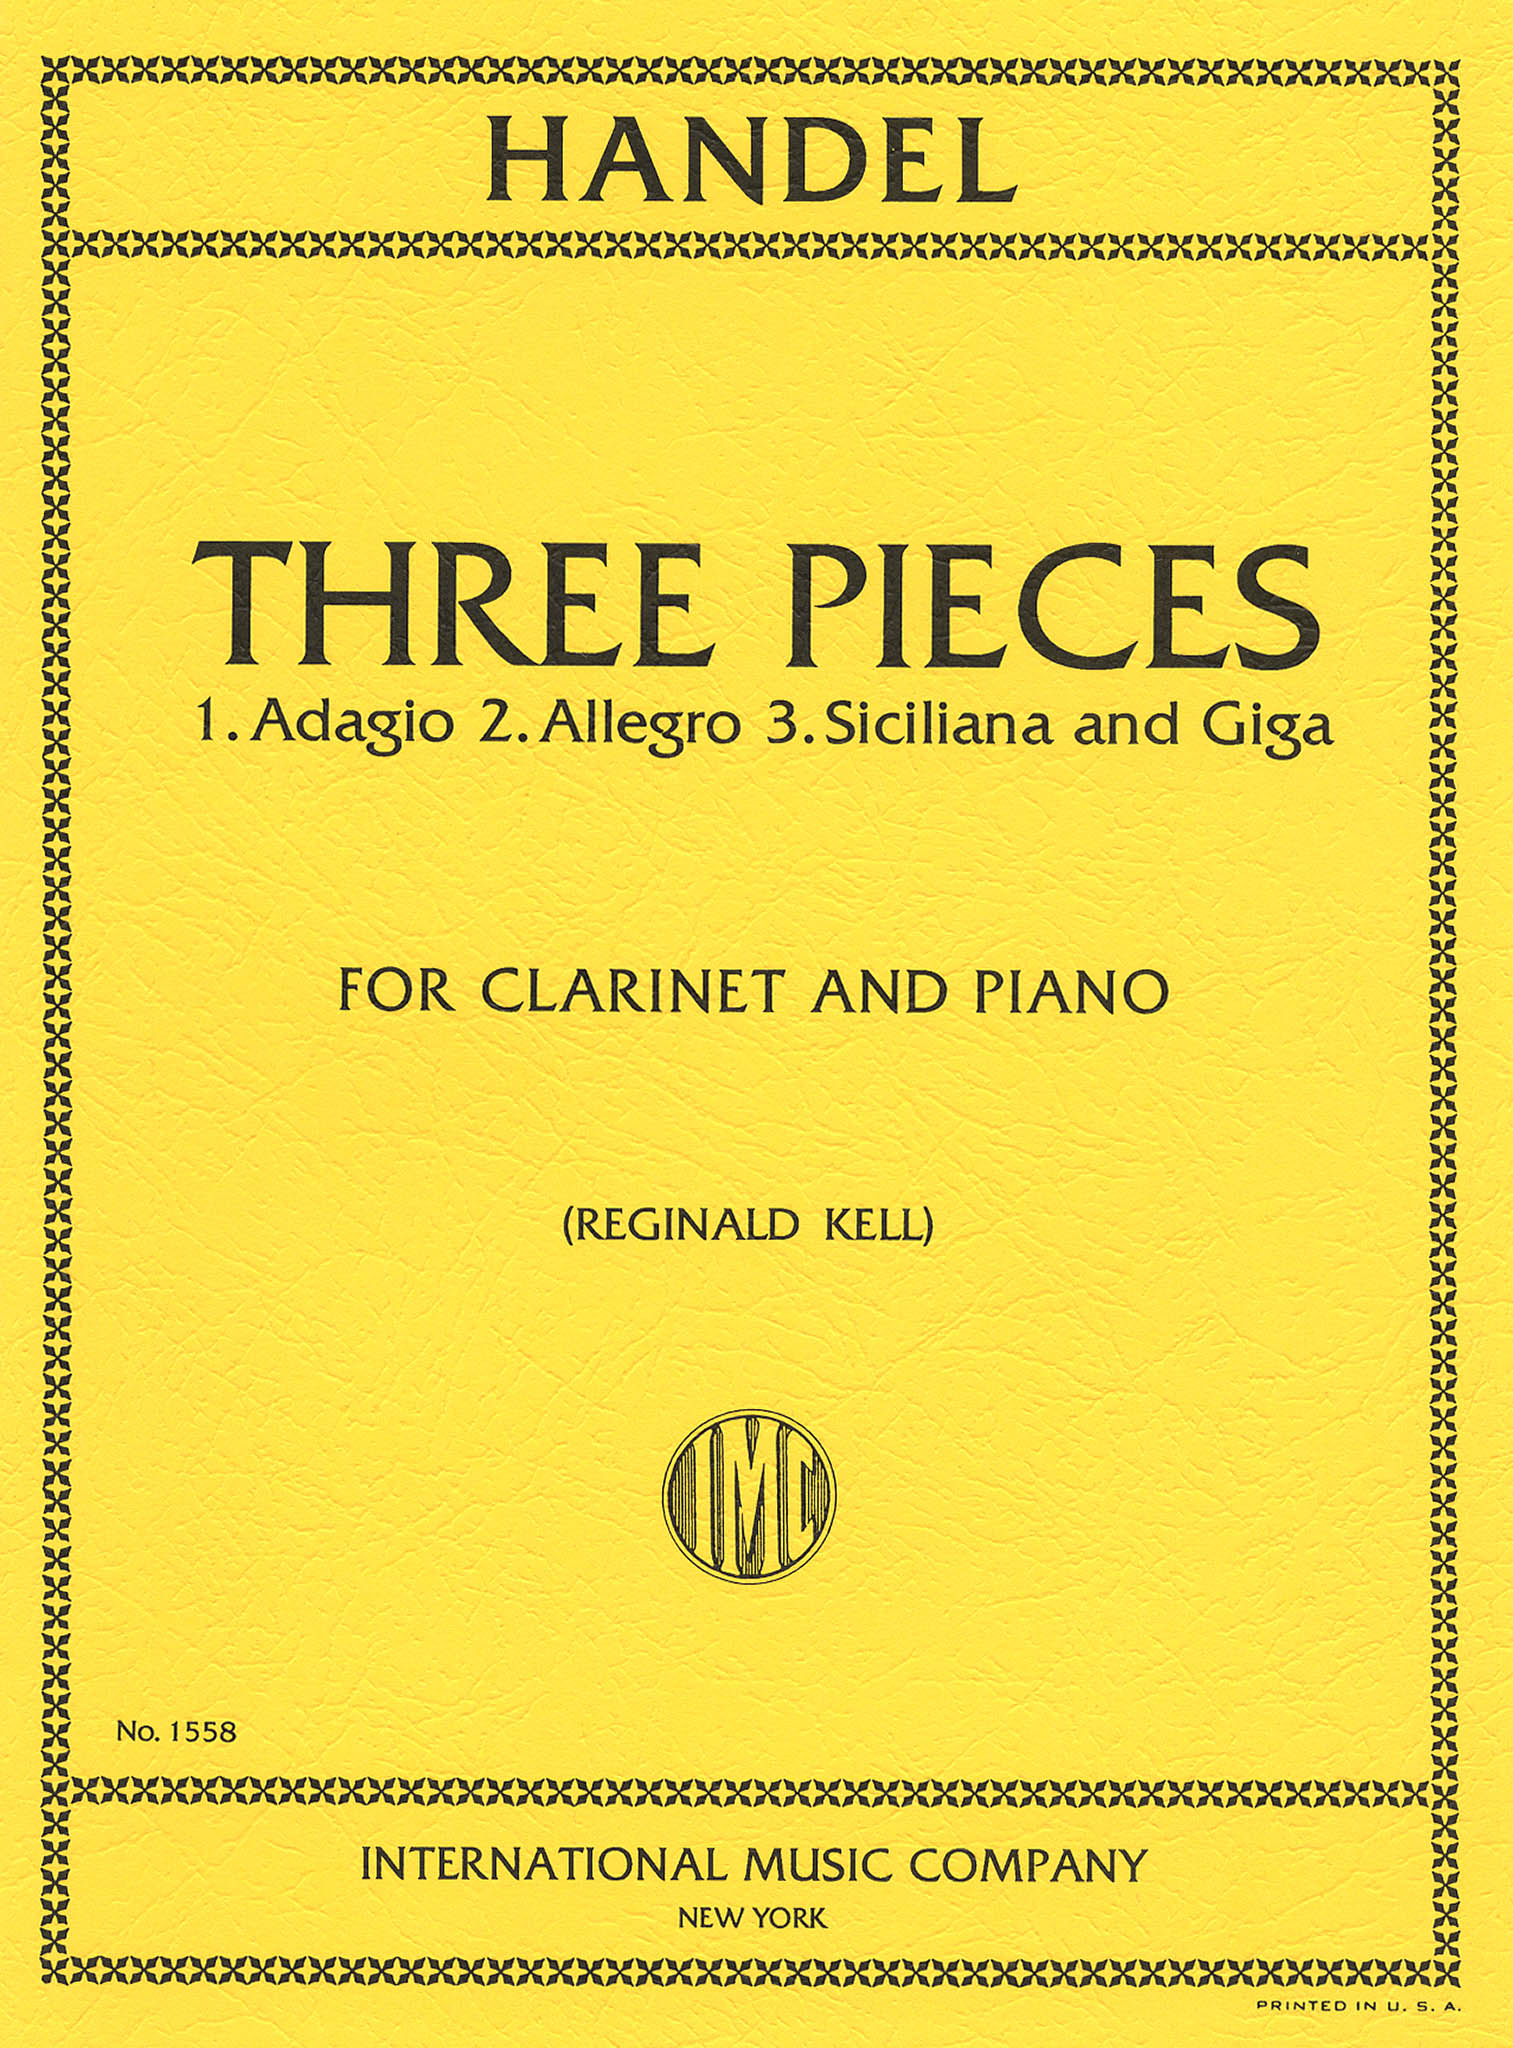 Handel Kell Three Pieces for Clarinet & Piano cover